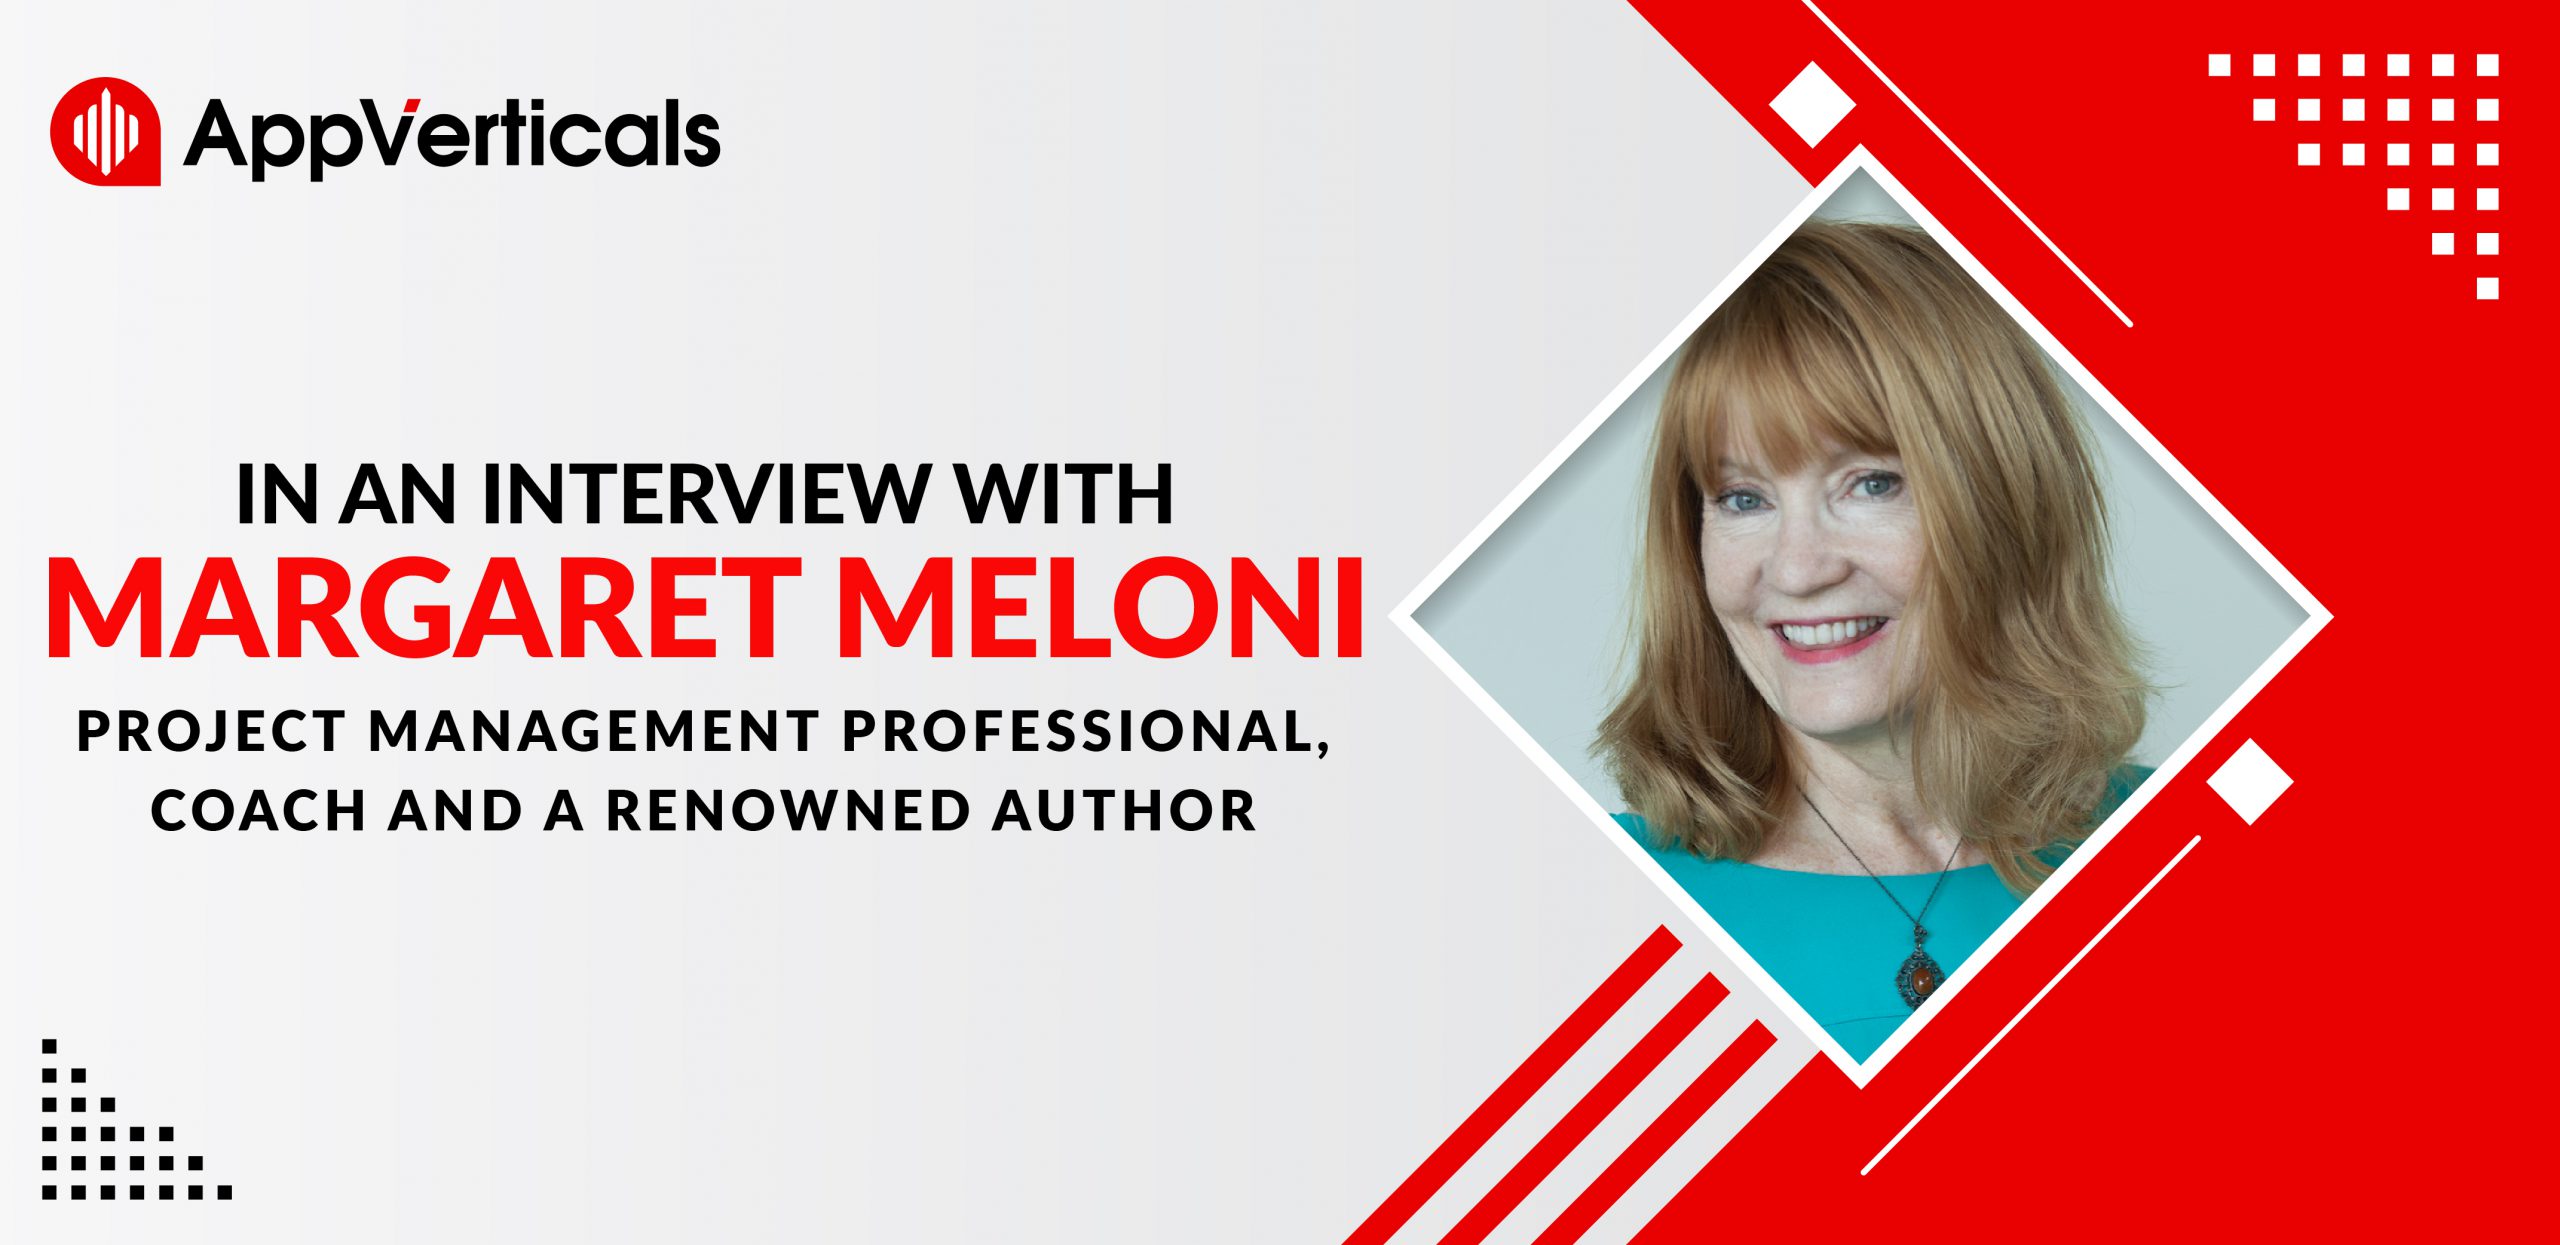 AppVerticals in an Interview With Project Management Professional and a Renowned Author Margaret Meloni